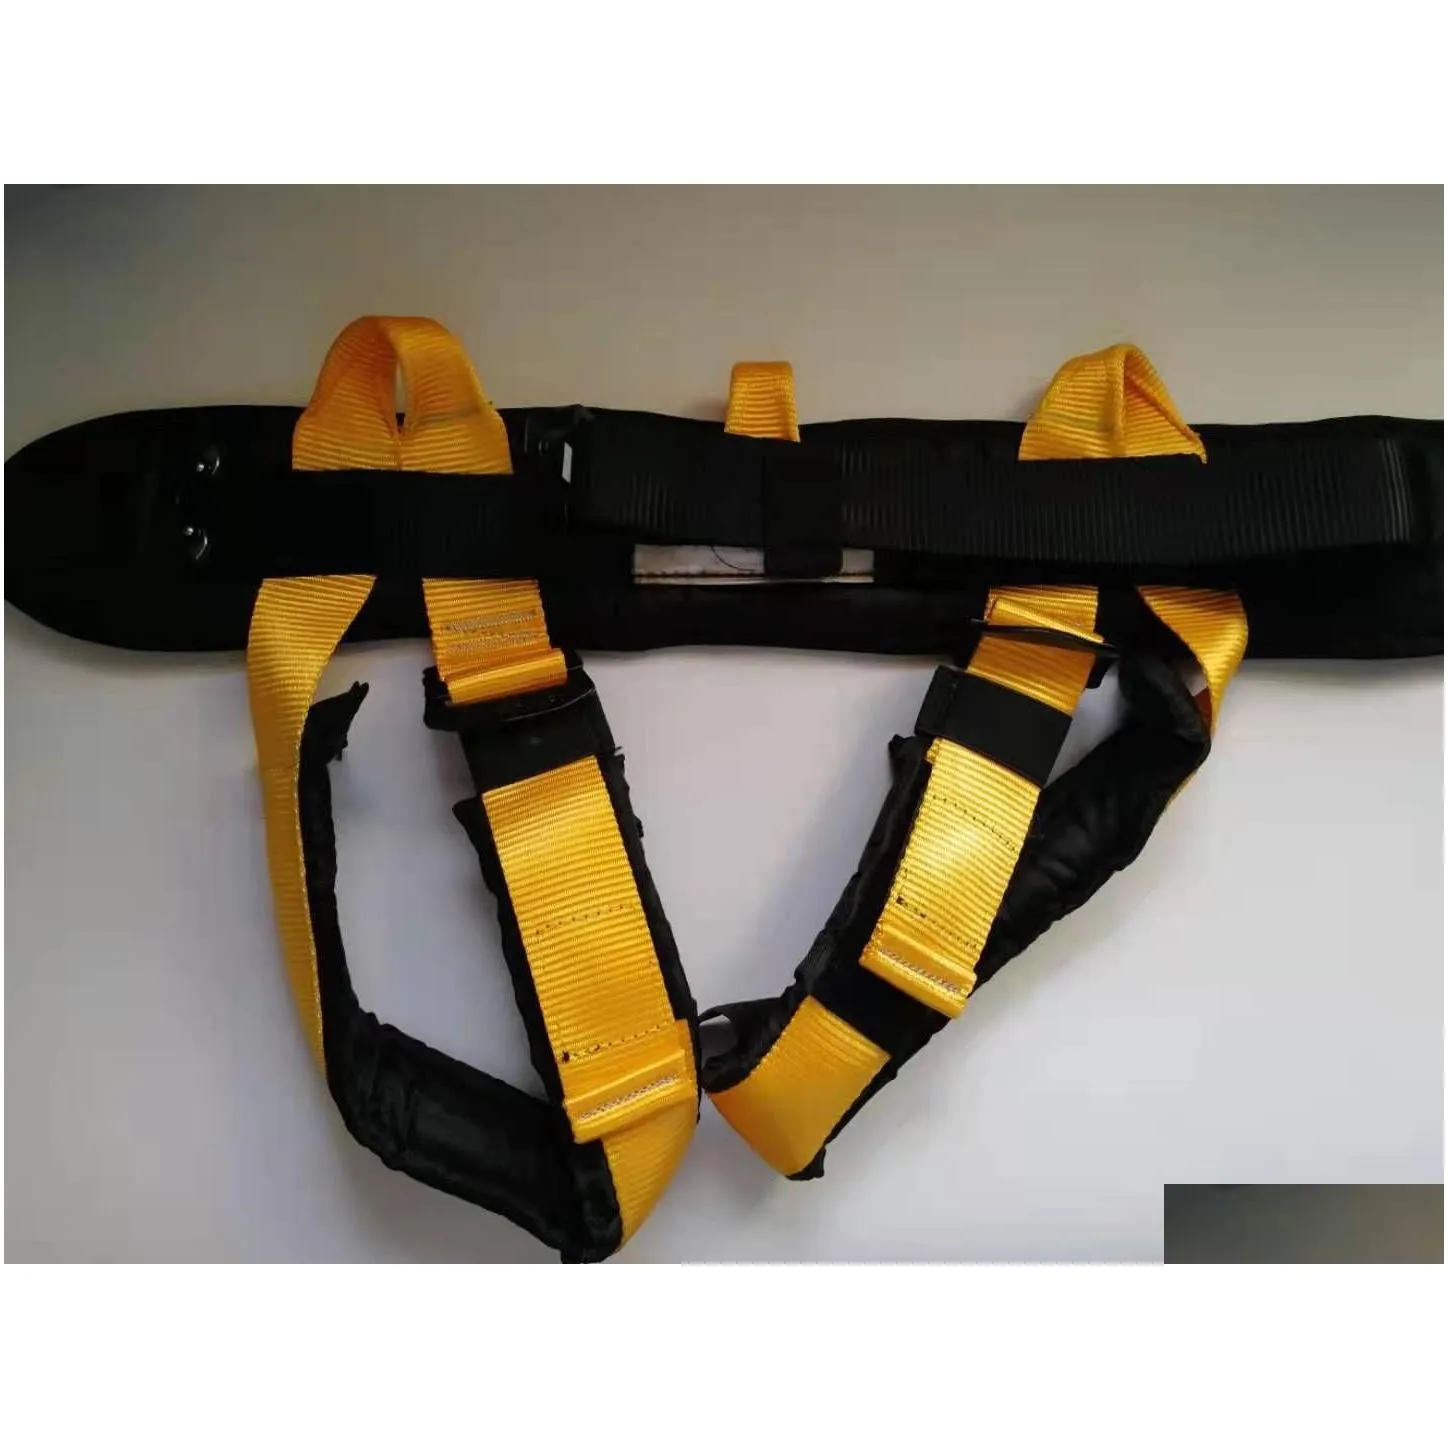 Climbing Ropes Adjustable Bungee Dance Jumping Harness Fitness Rotating Harnis Aerial Act Safety Belt Adults 230726